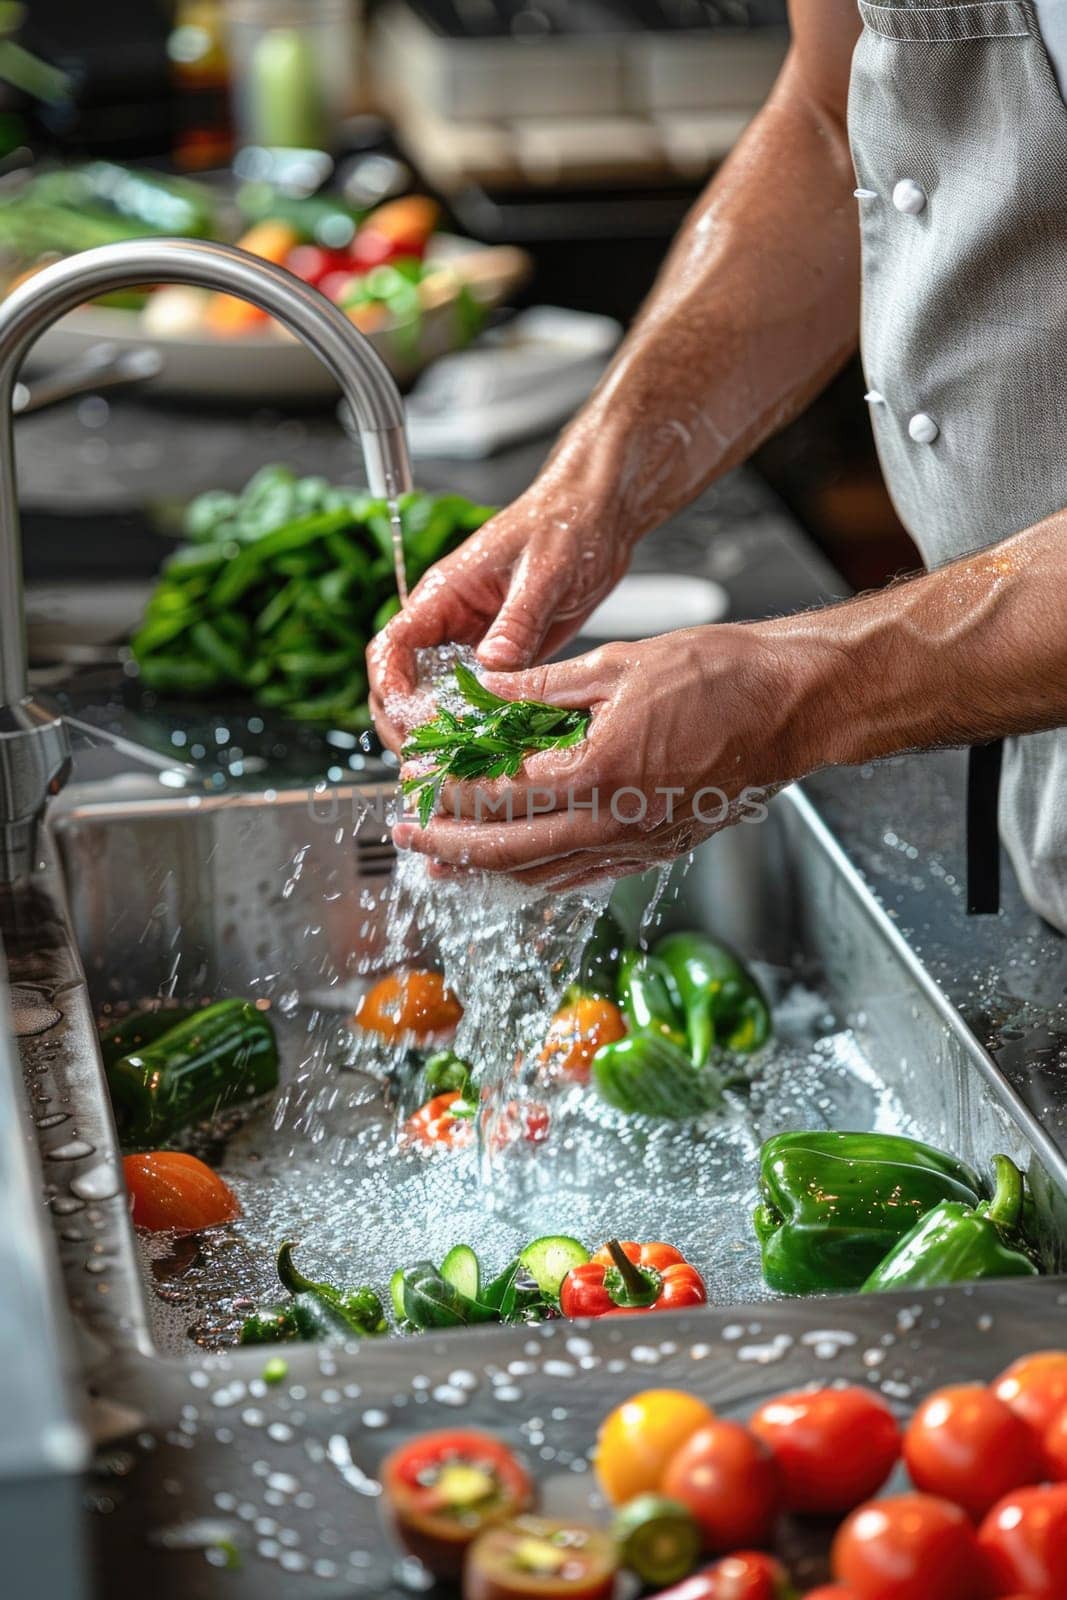 A man cleans leafy green vegetables in a kitchen sink, focusing on food preparation and cooking at home